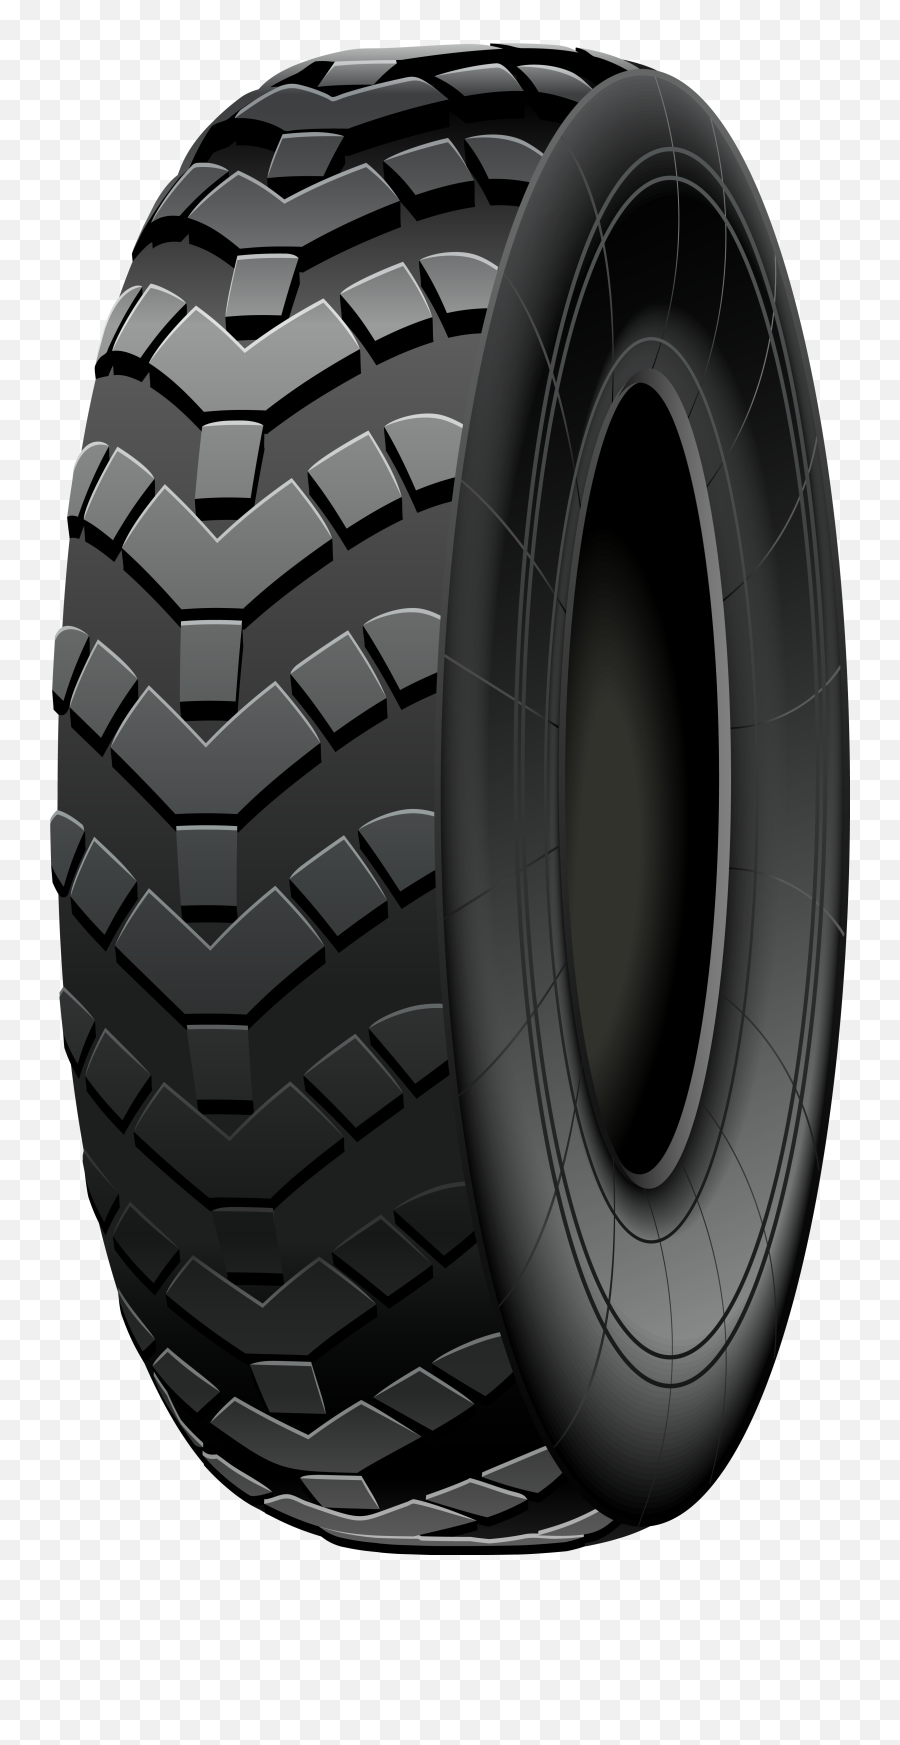 Png Images Tyre Truck Tyre Car Tire - Clipart Transparent Tire Png Emoji,Tires Clipart